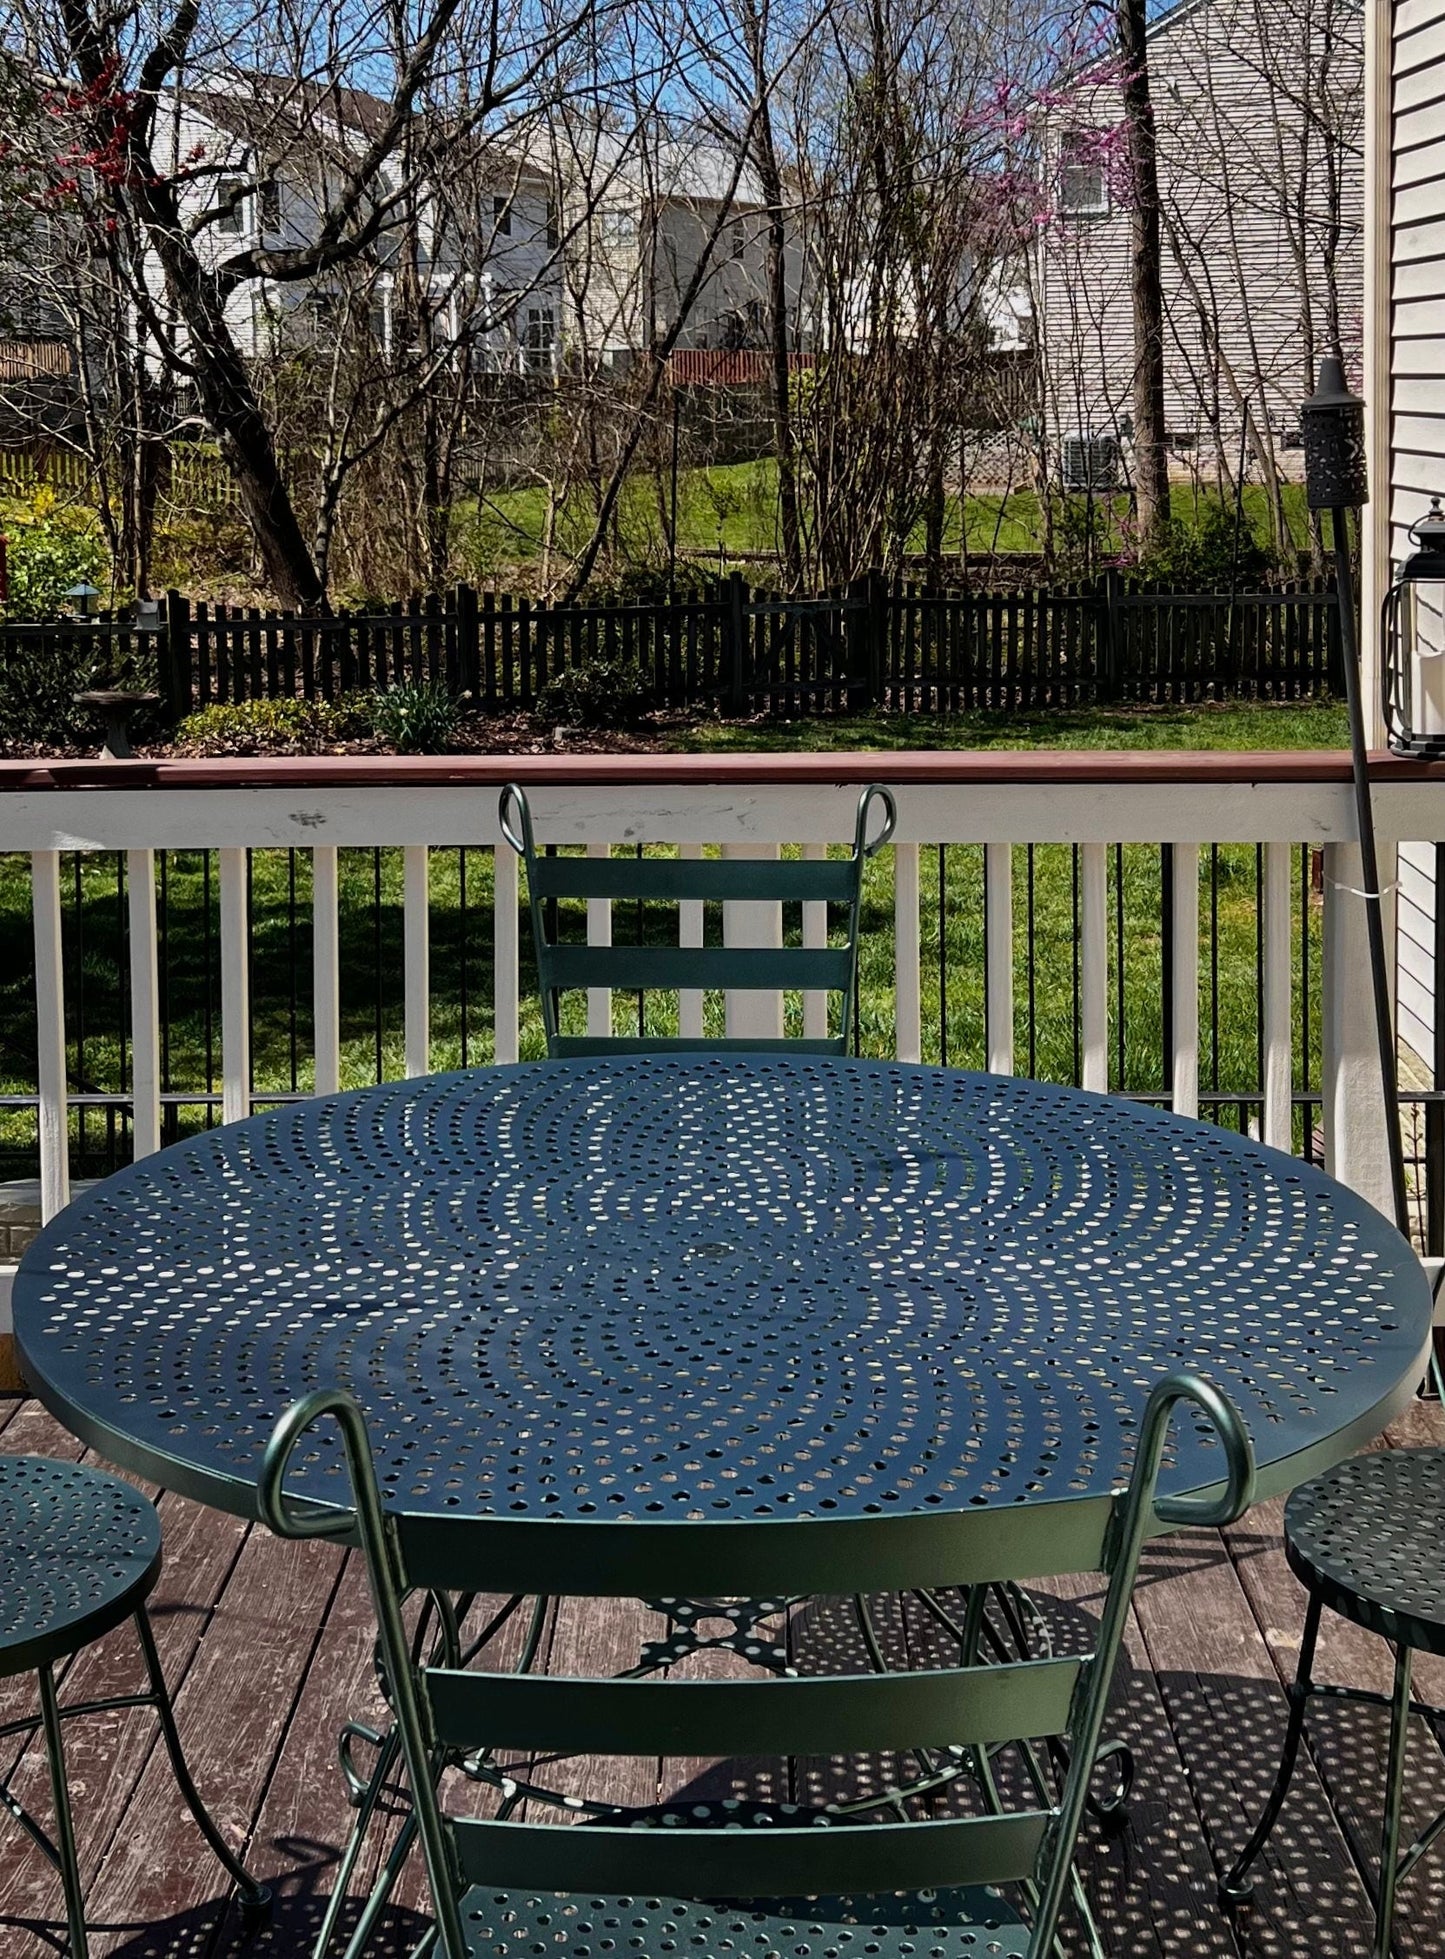 Wrought Iron Patio Set (1 Table, 4 Chairs)